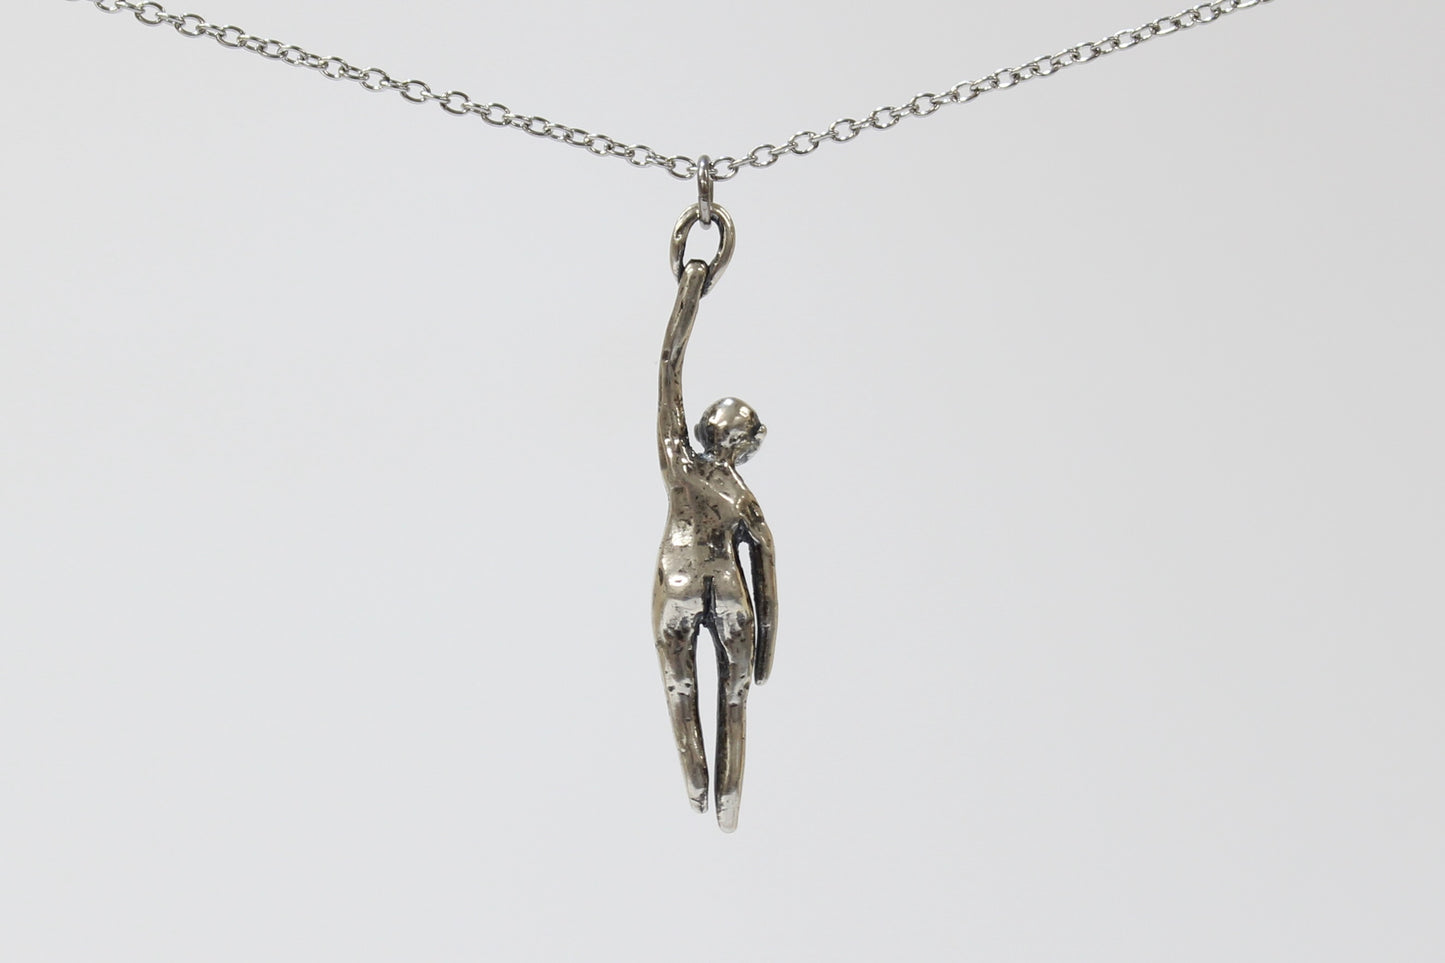 SILVER Hang in There Buddy (looking down) Pendant Necklace. Sterling silver. 1 1/2" x 1/2". Select chain length 16, 18, 20 inch